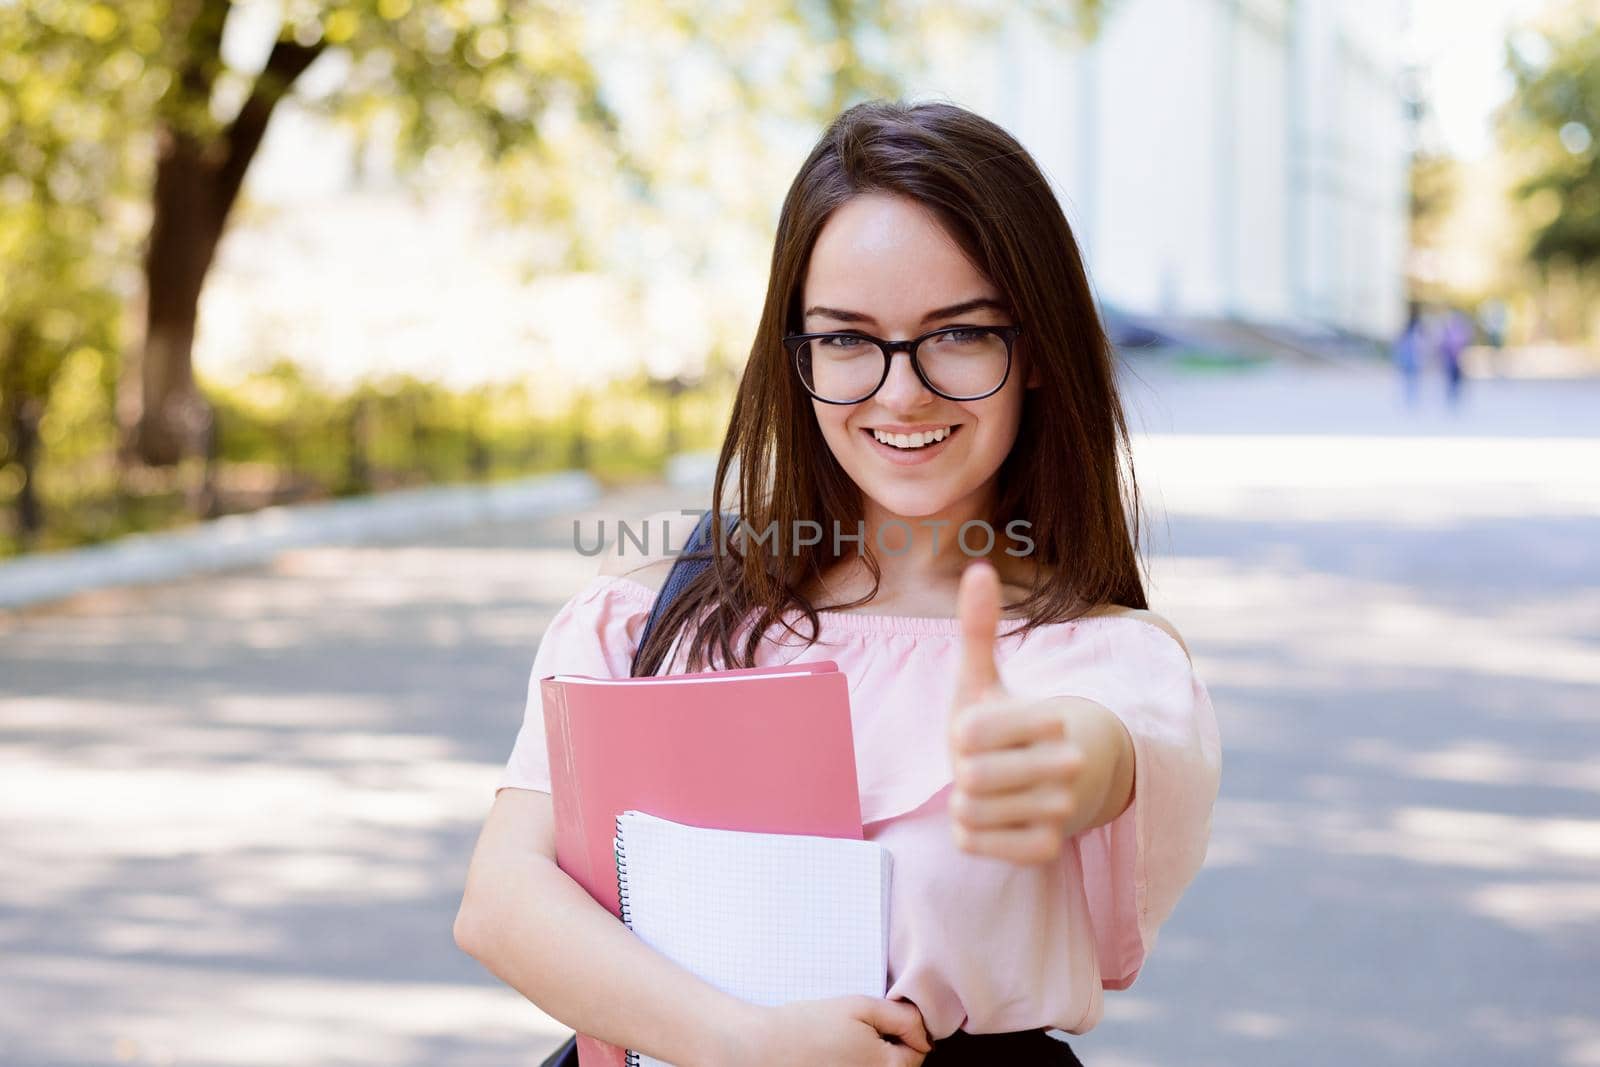 Student showing thumbs up standing against old conventional university with books and notes, wearing spectacles, blouse and skirt expressing happiness